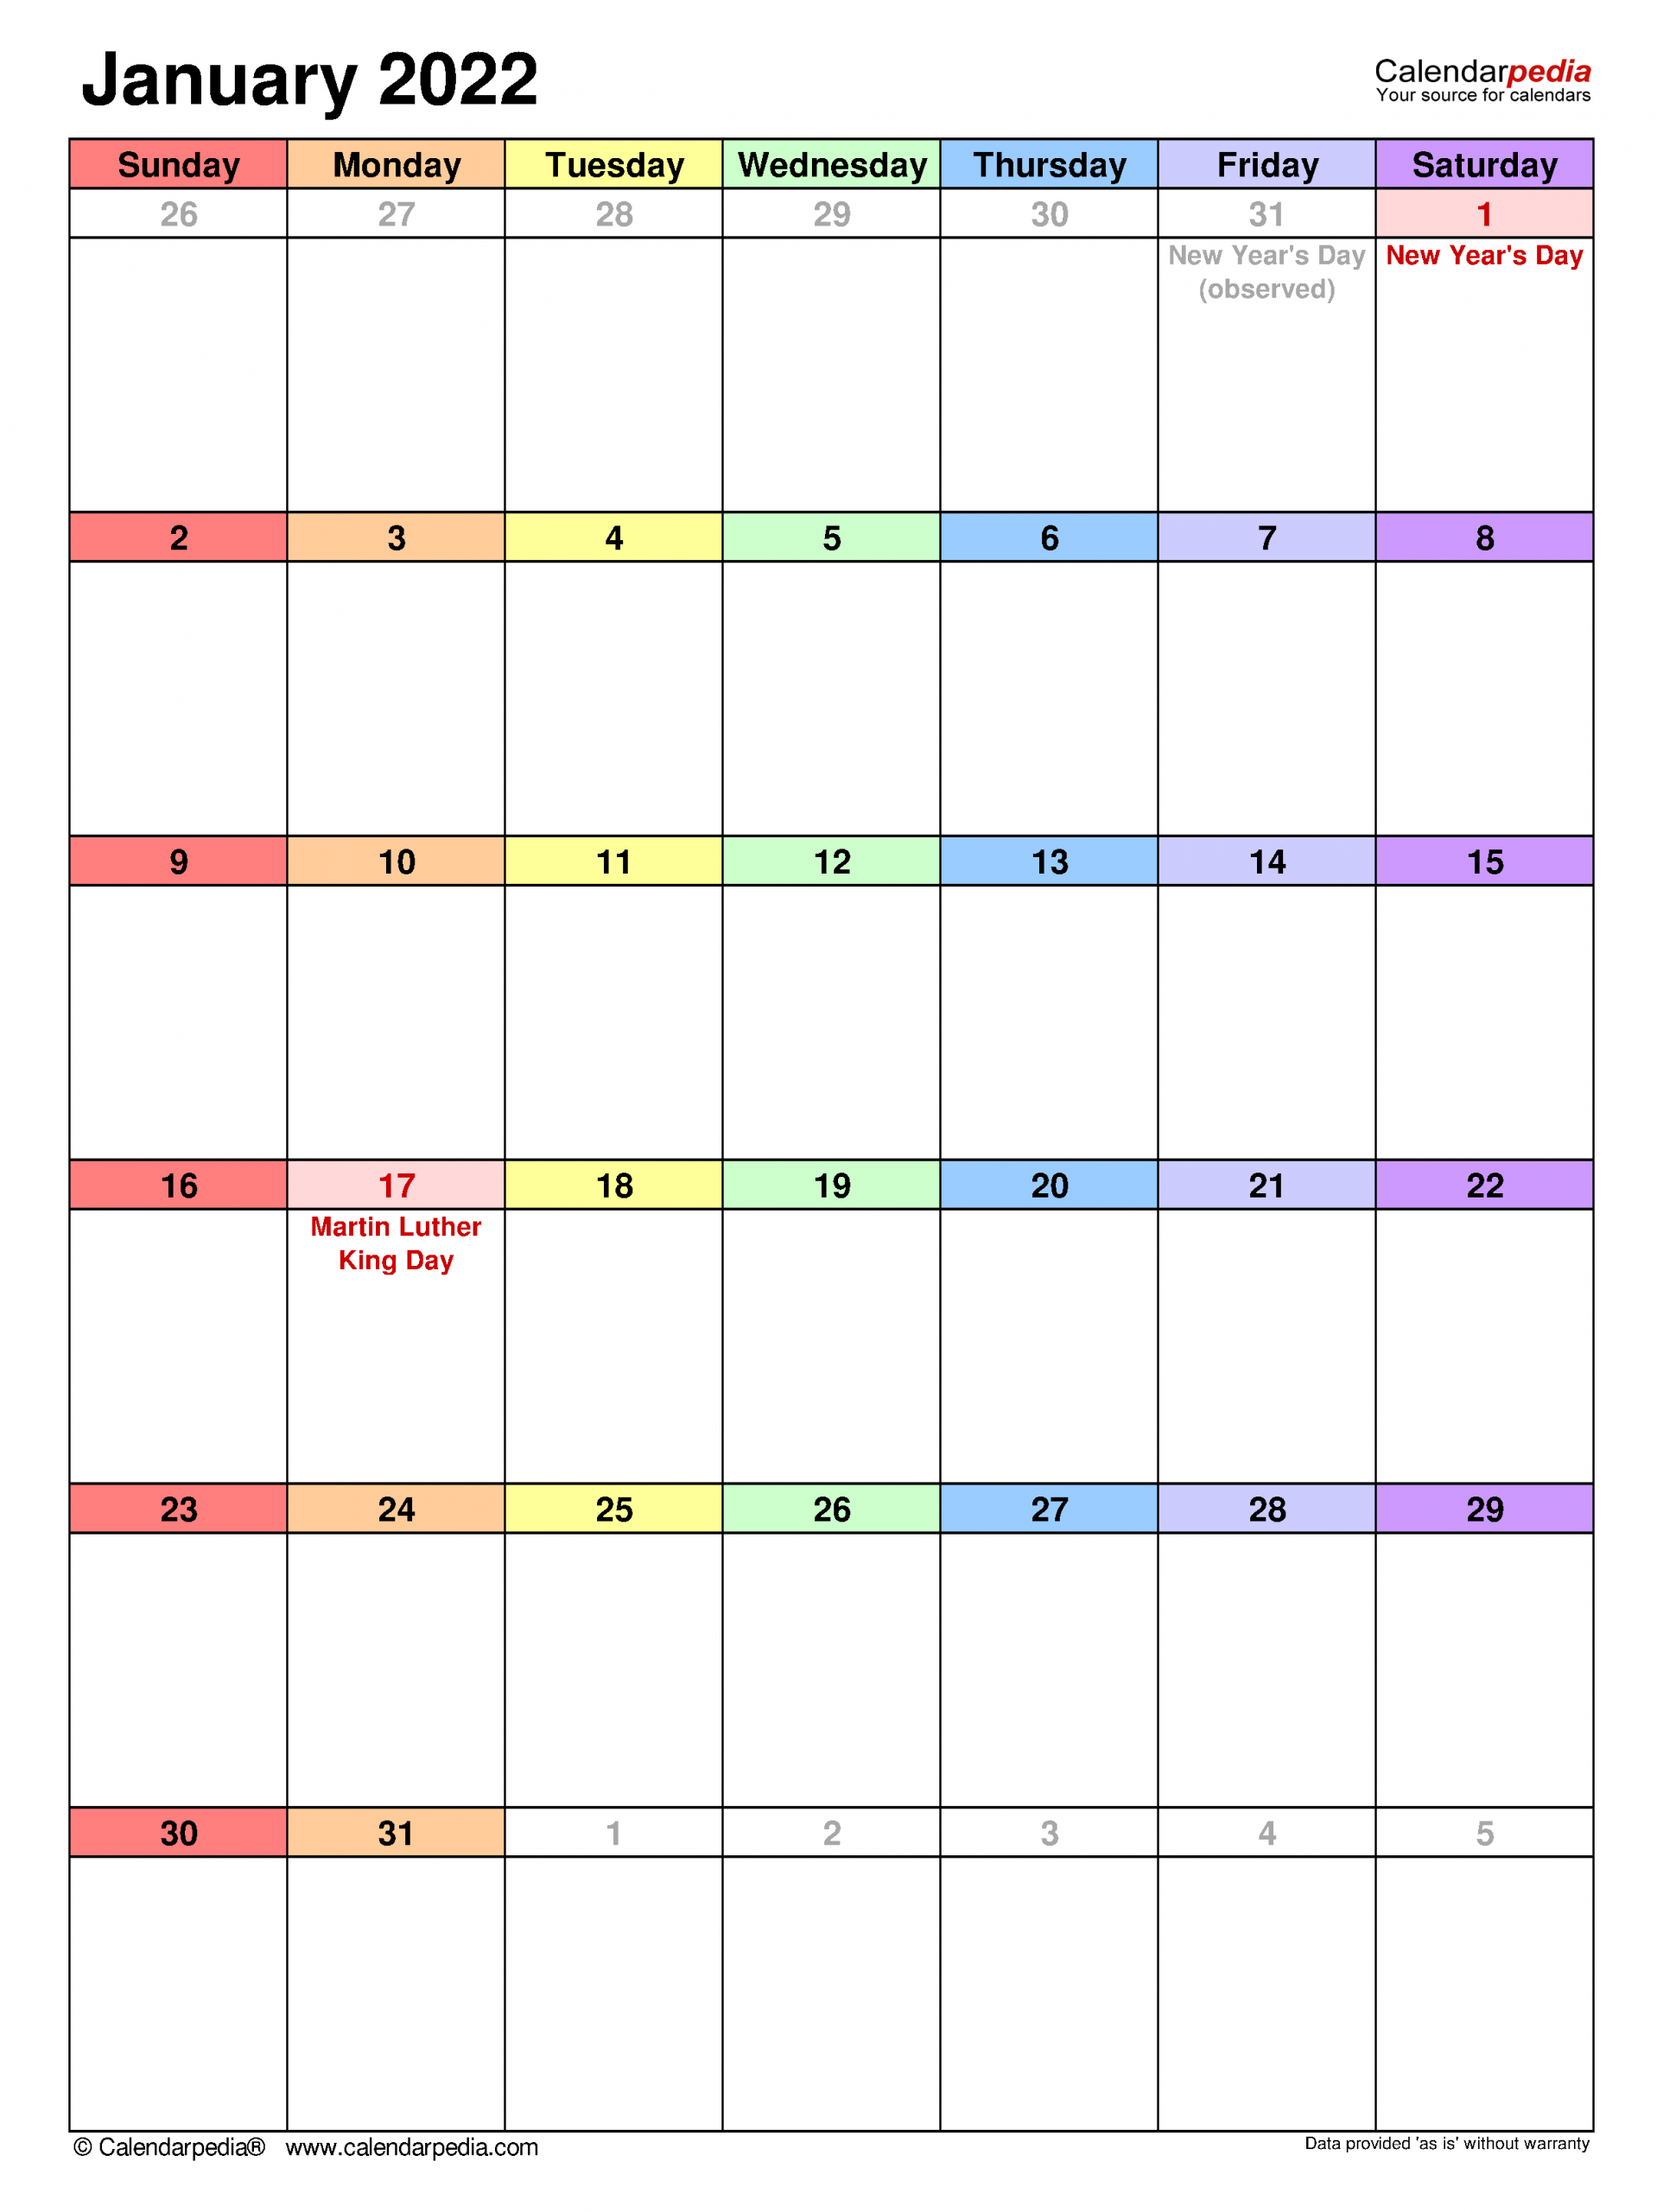 January 2022 Calendar | Templates For Word, Excel And Pdf